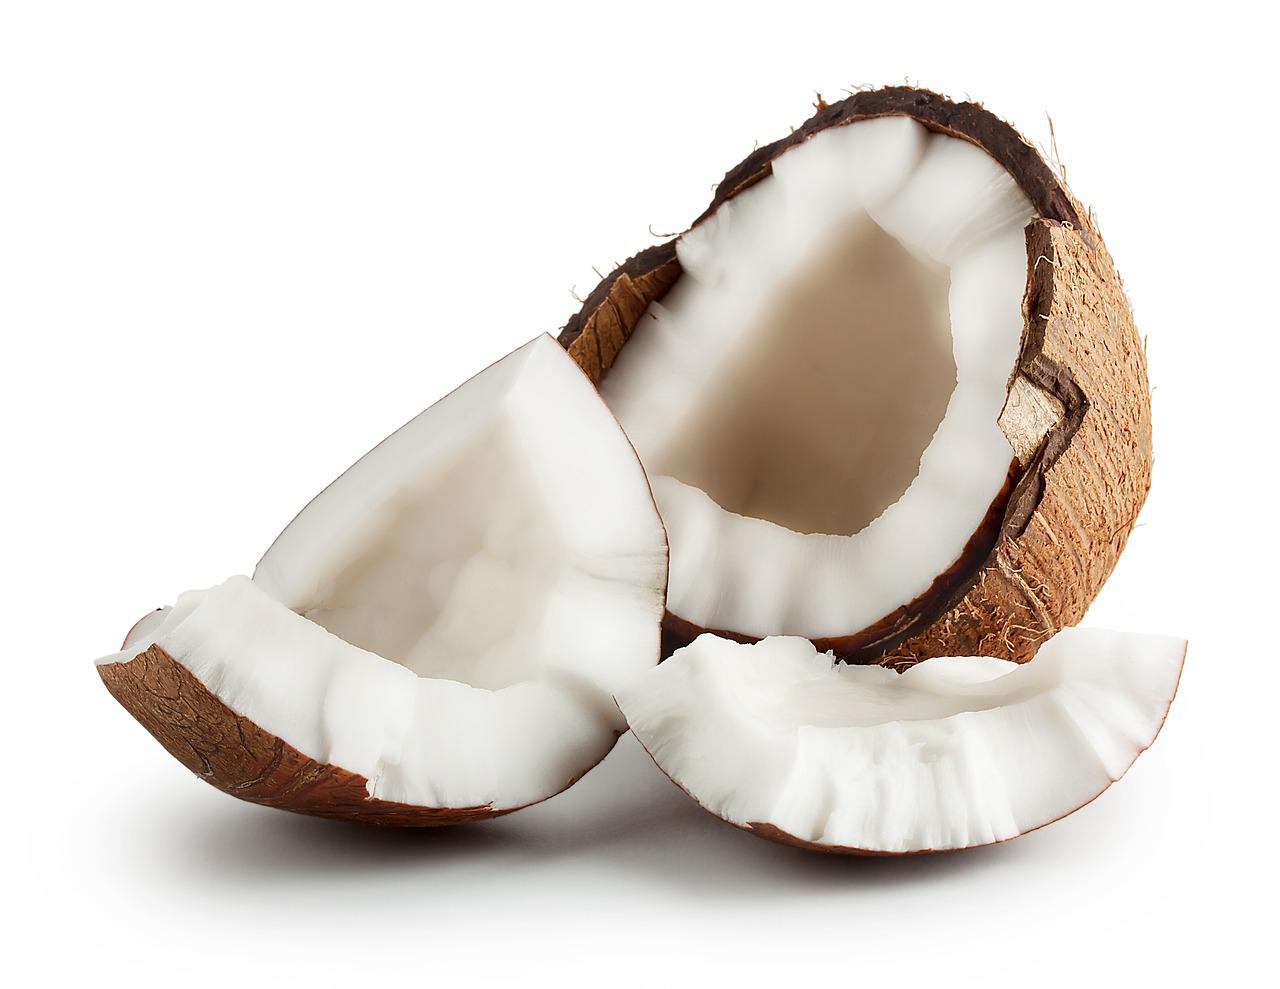 “Coconut Oil Is Unhealthy,” Experts Declare